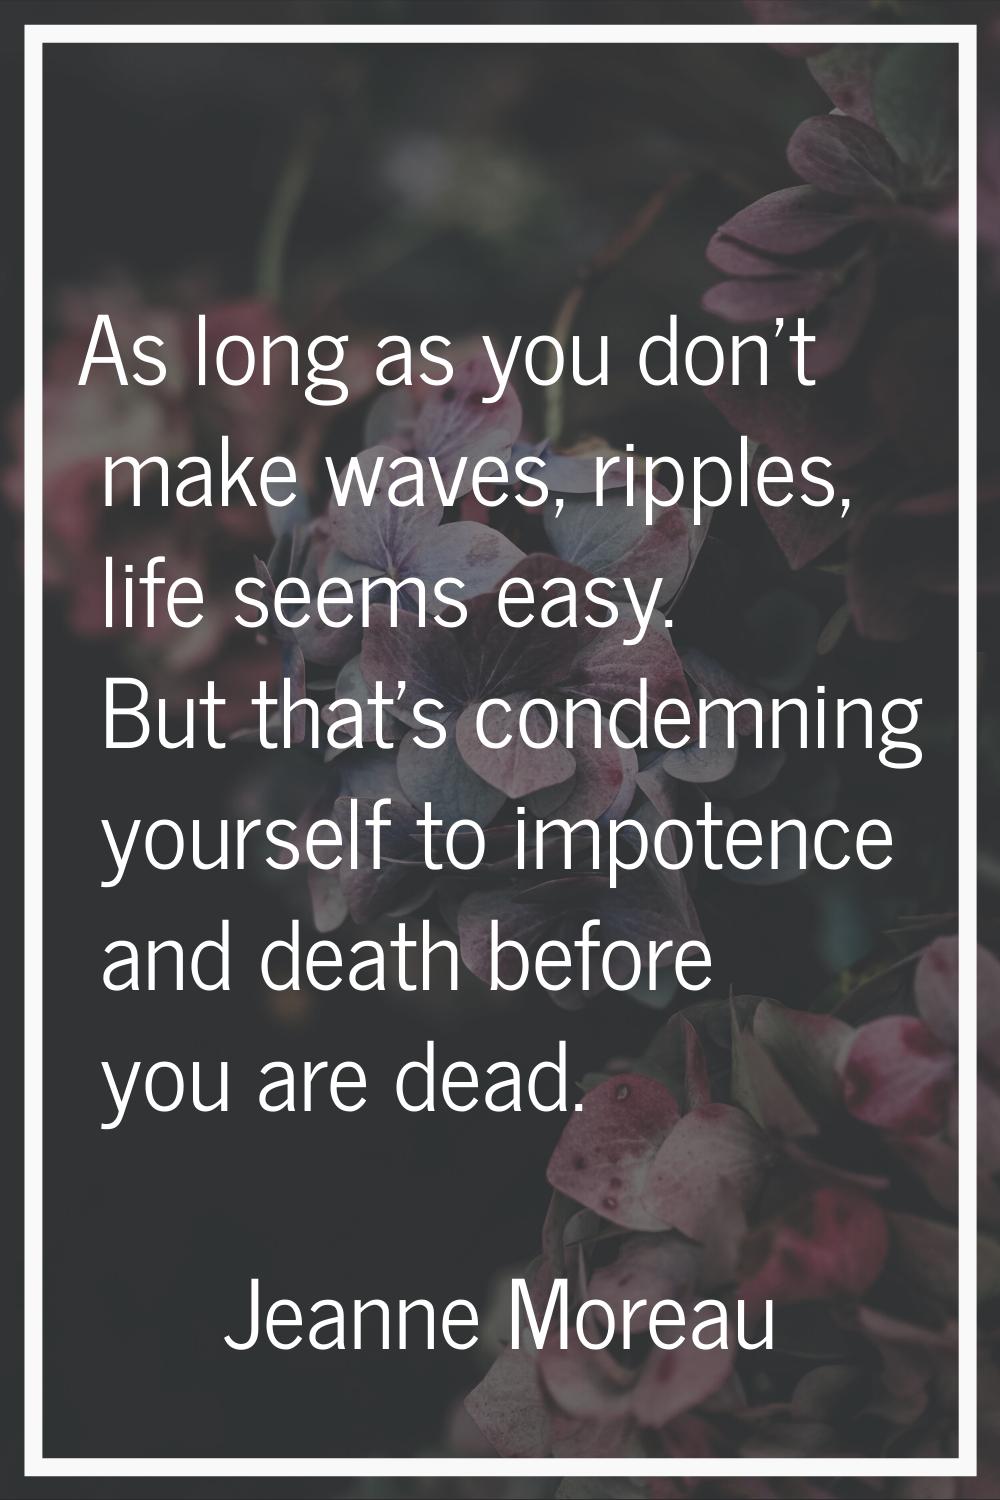 As long as you don't make waves, ripples, life seems easy. But that's condemning yourself to impote